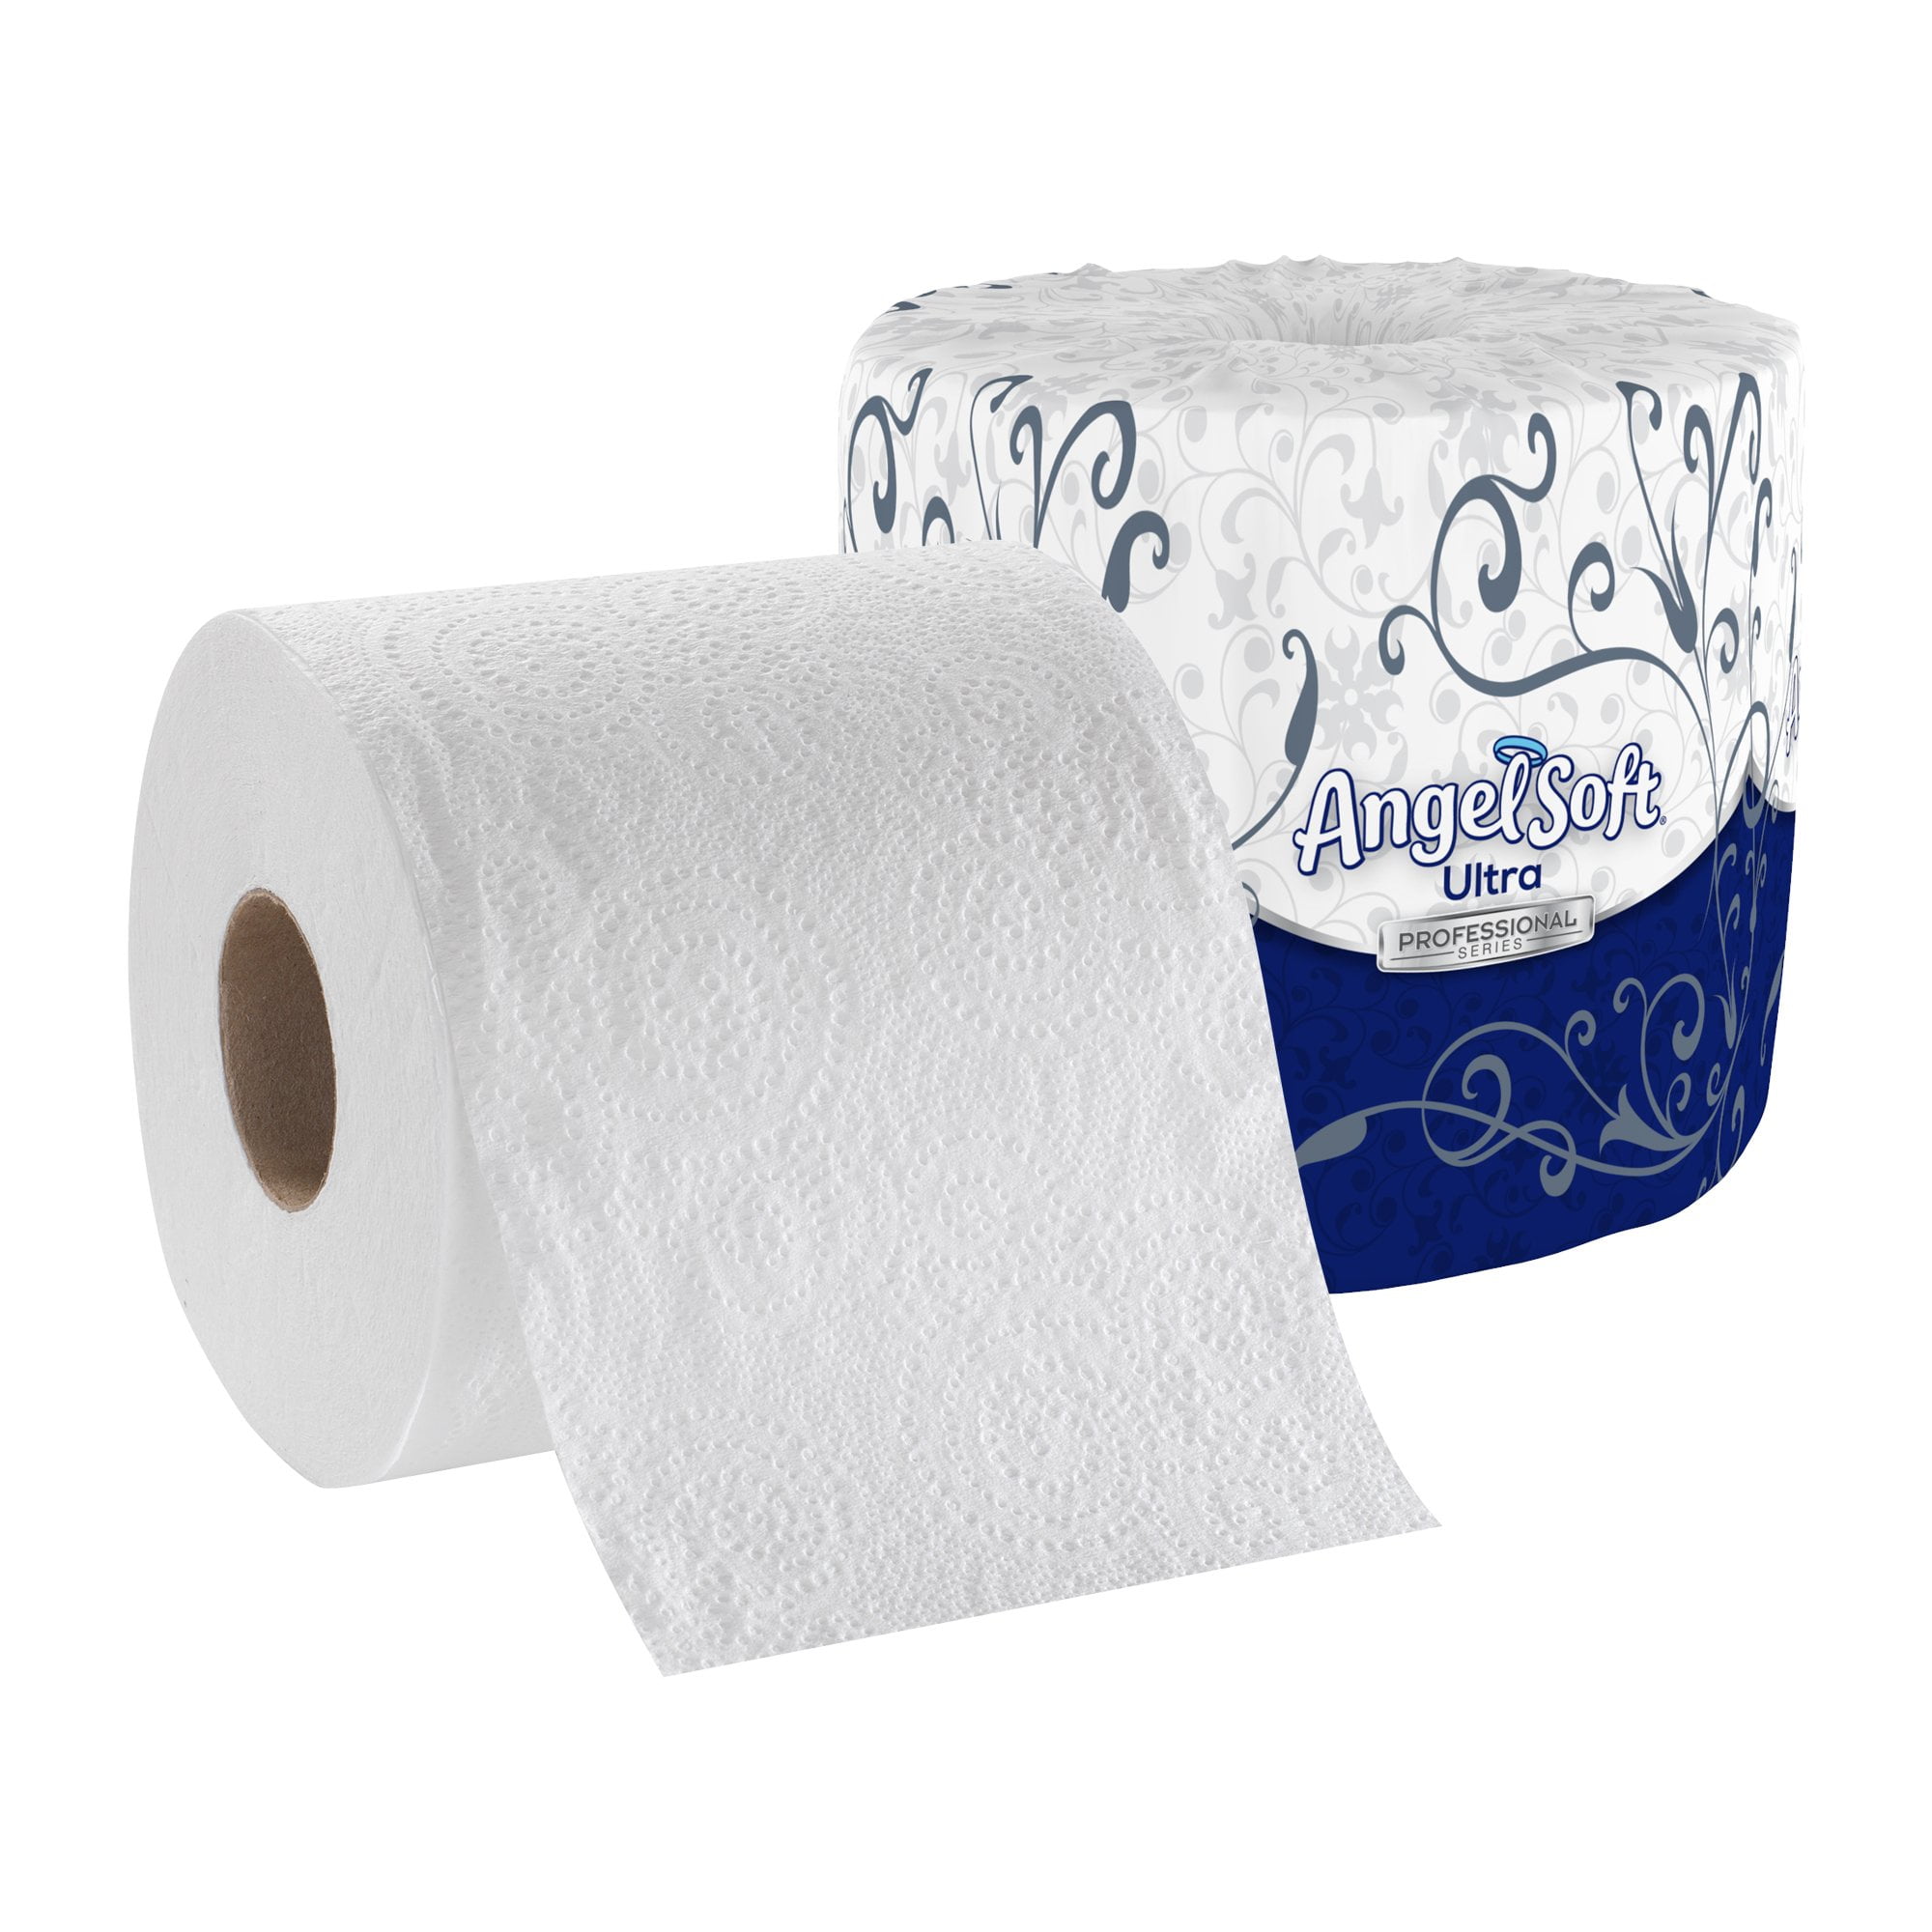 8 Ultra-Soft Toilet Papers for a Luxurious Bathroom Experience